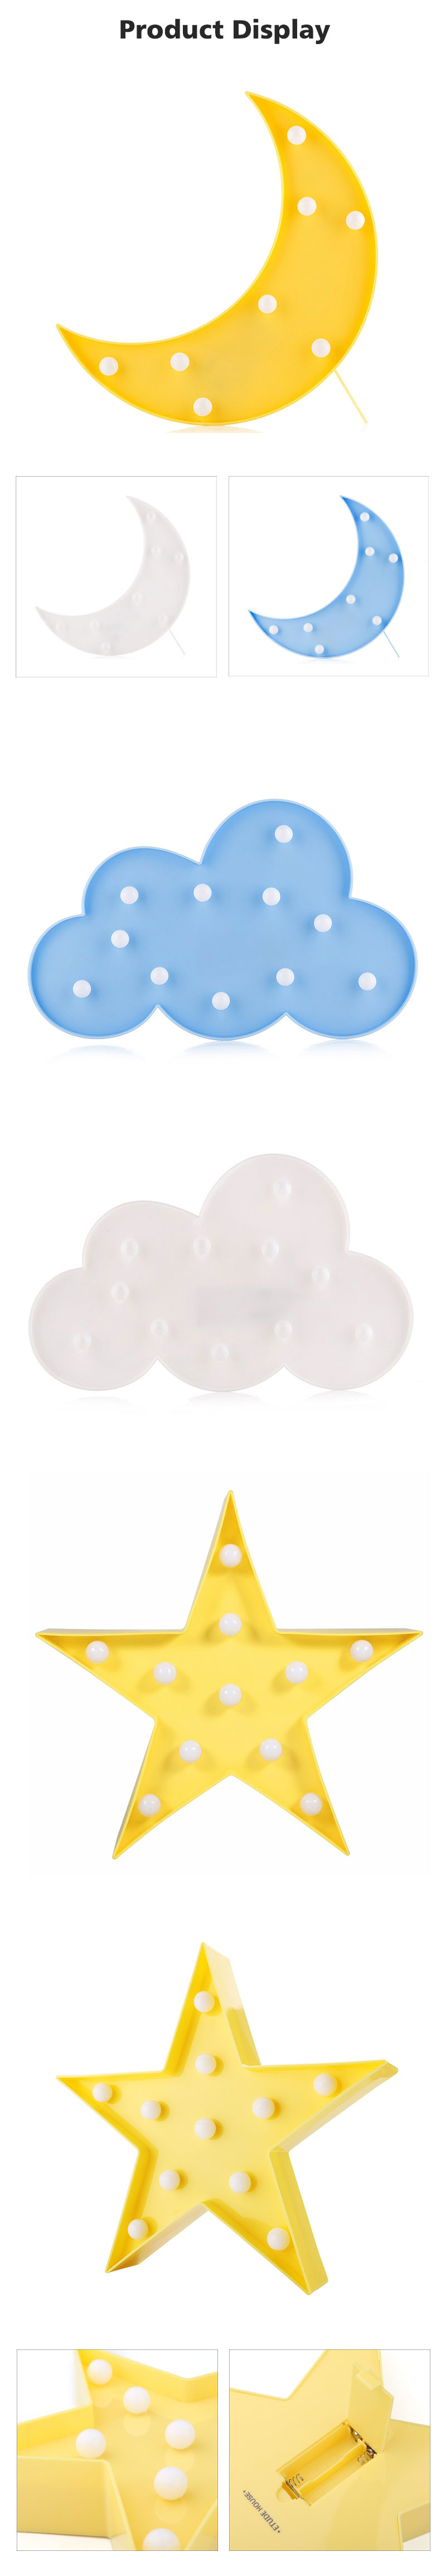 Vvcare-BC-NL02-Led-Night-Light-for-Kids-Moon-Star-Cloud-Bedroom-Bedside-Lamp-Room-Party-Decorations-1198276-2